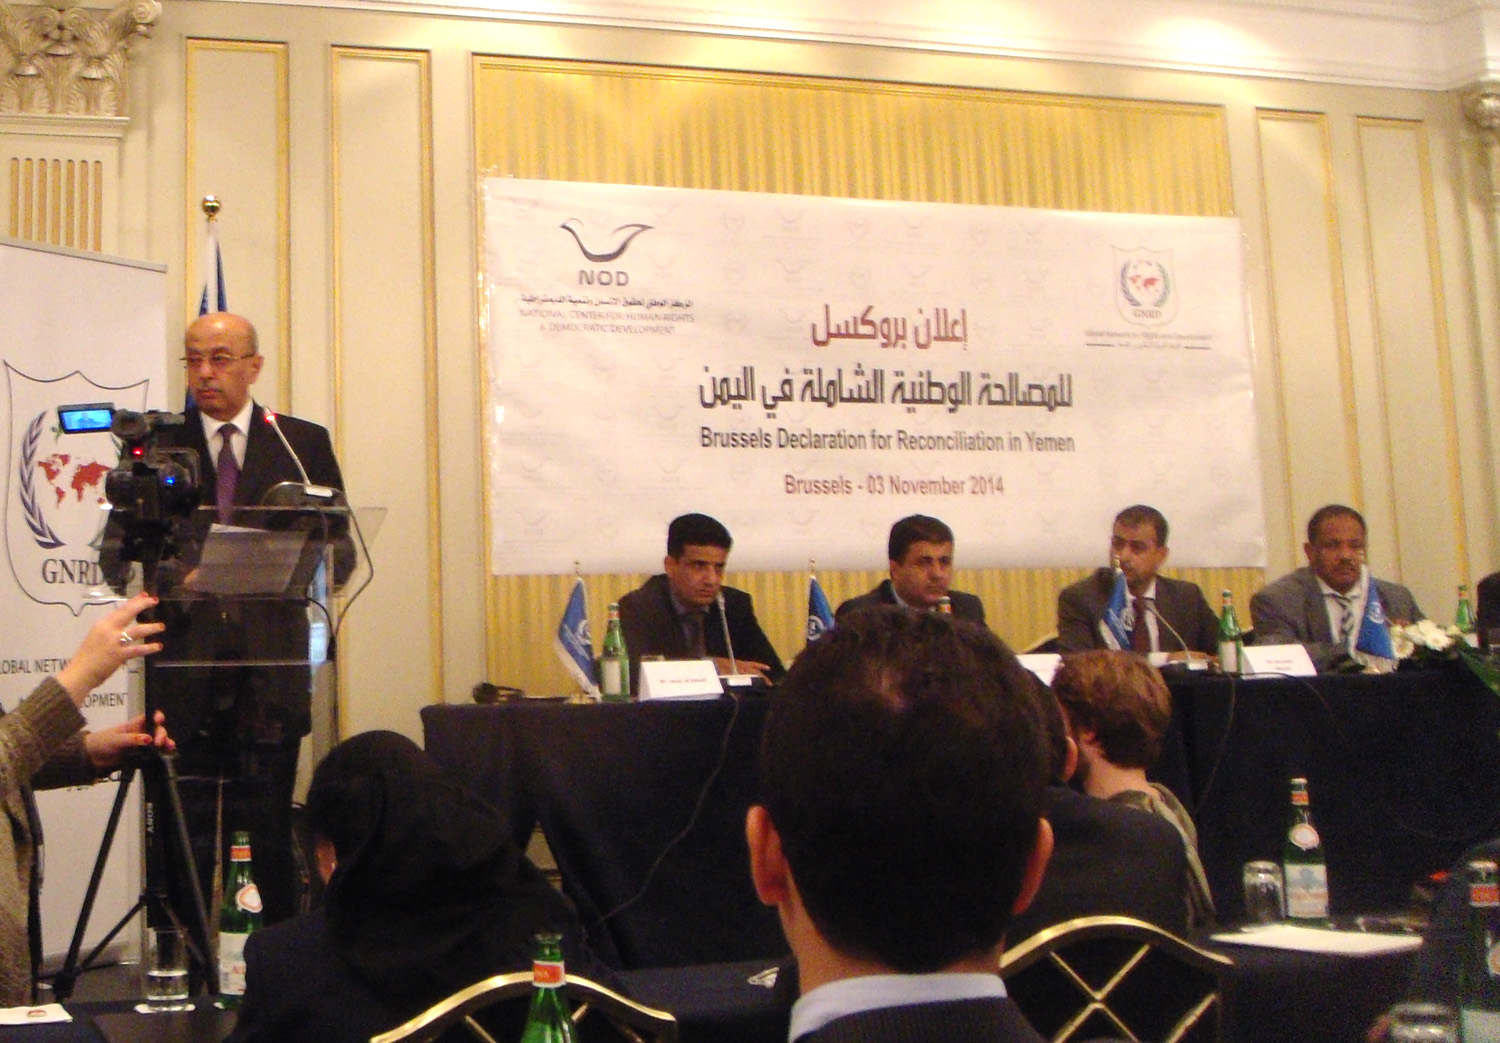 Yemeni political parties sign agreement on nat'l reconciliation in Brussels